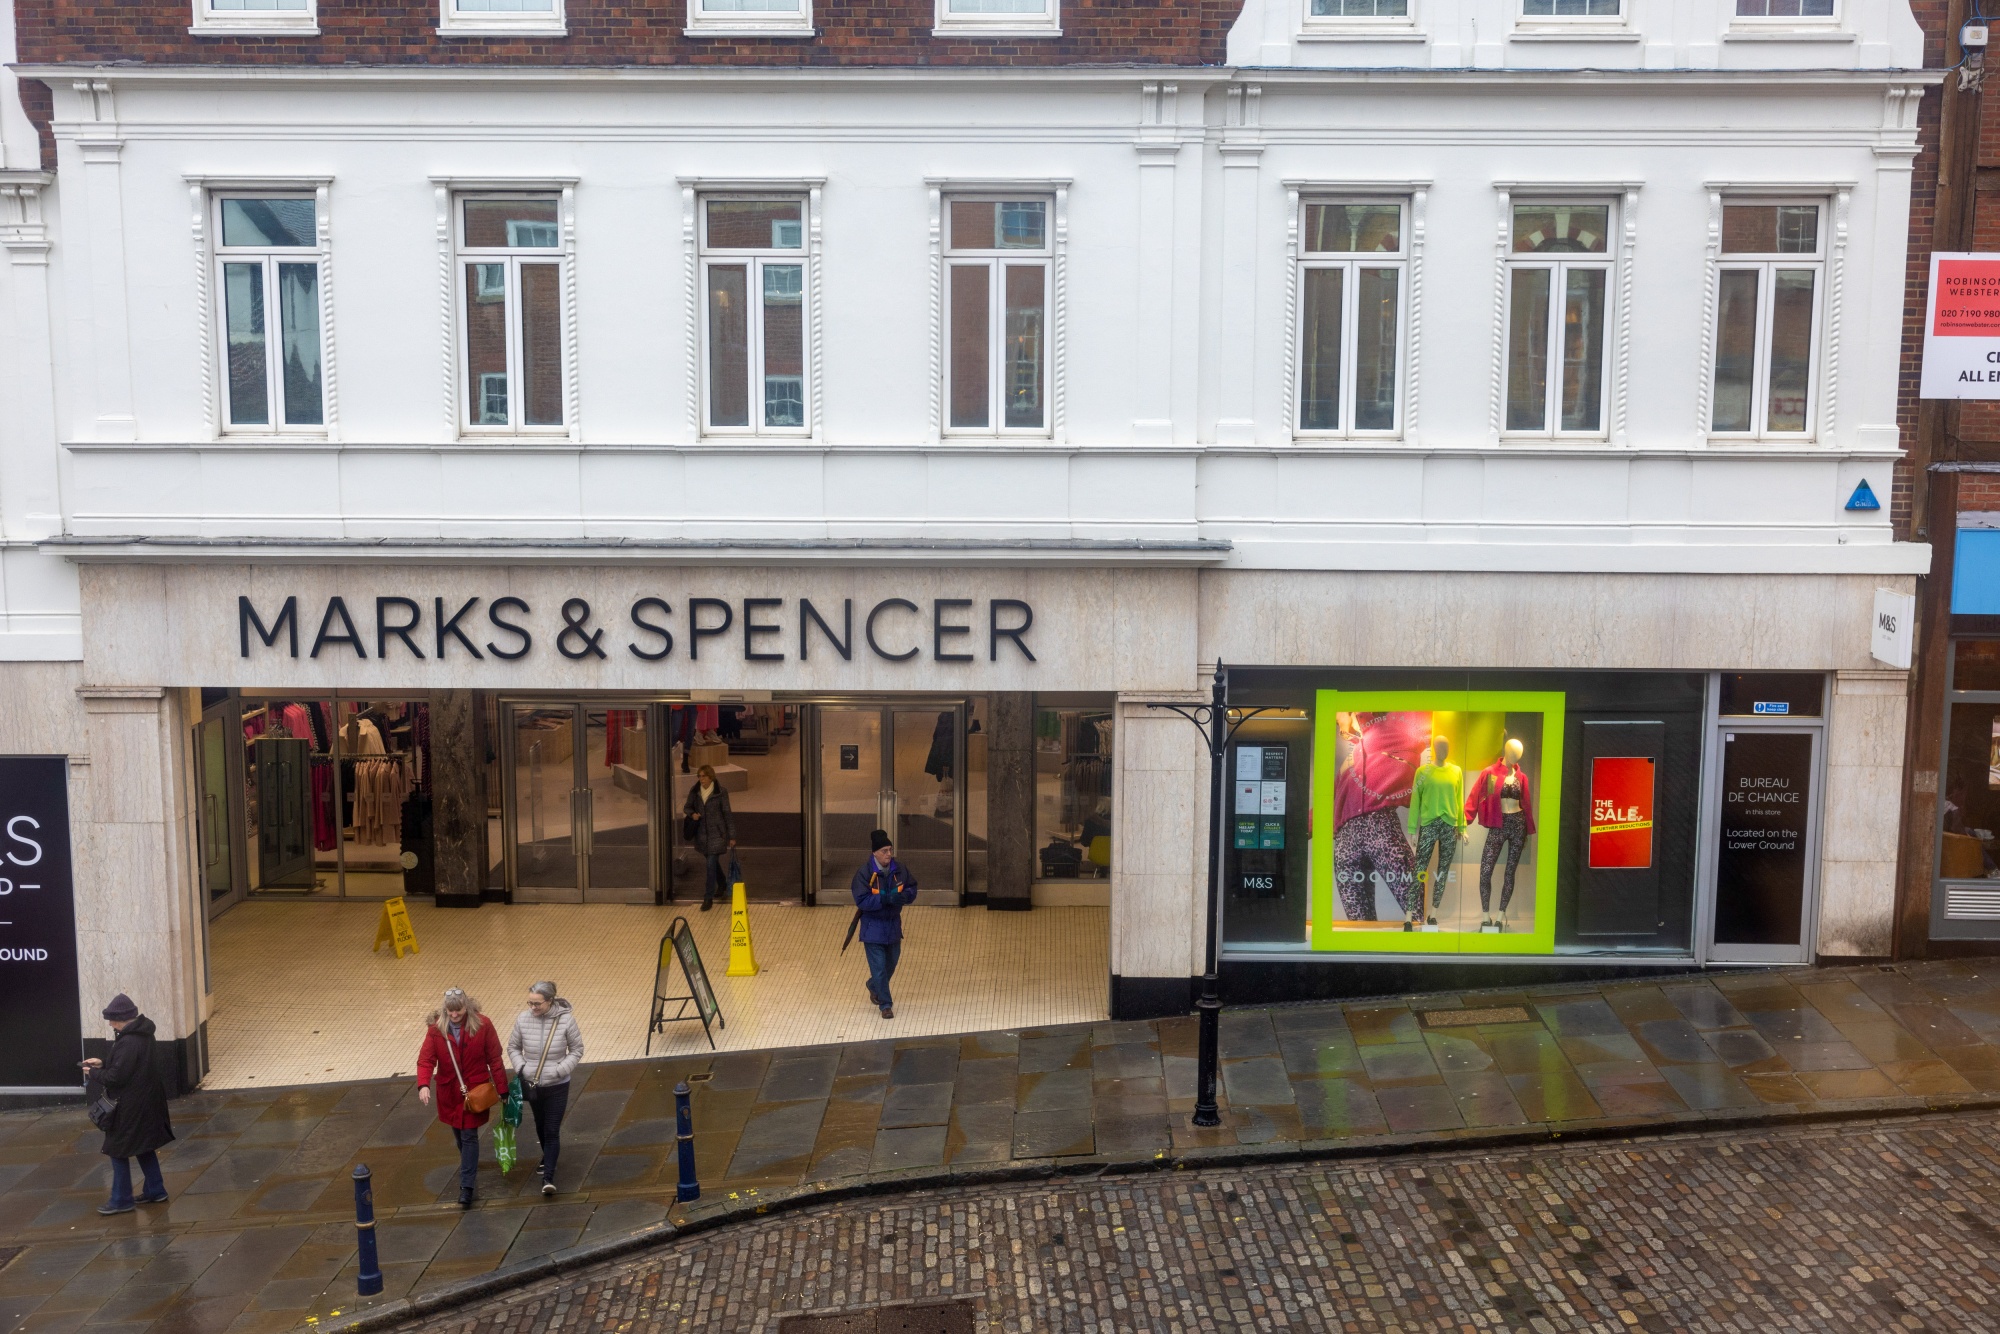 M&S News: Marks & Spencer Bets on UK High Street With New Shops - Bloomberg